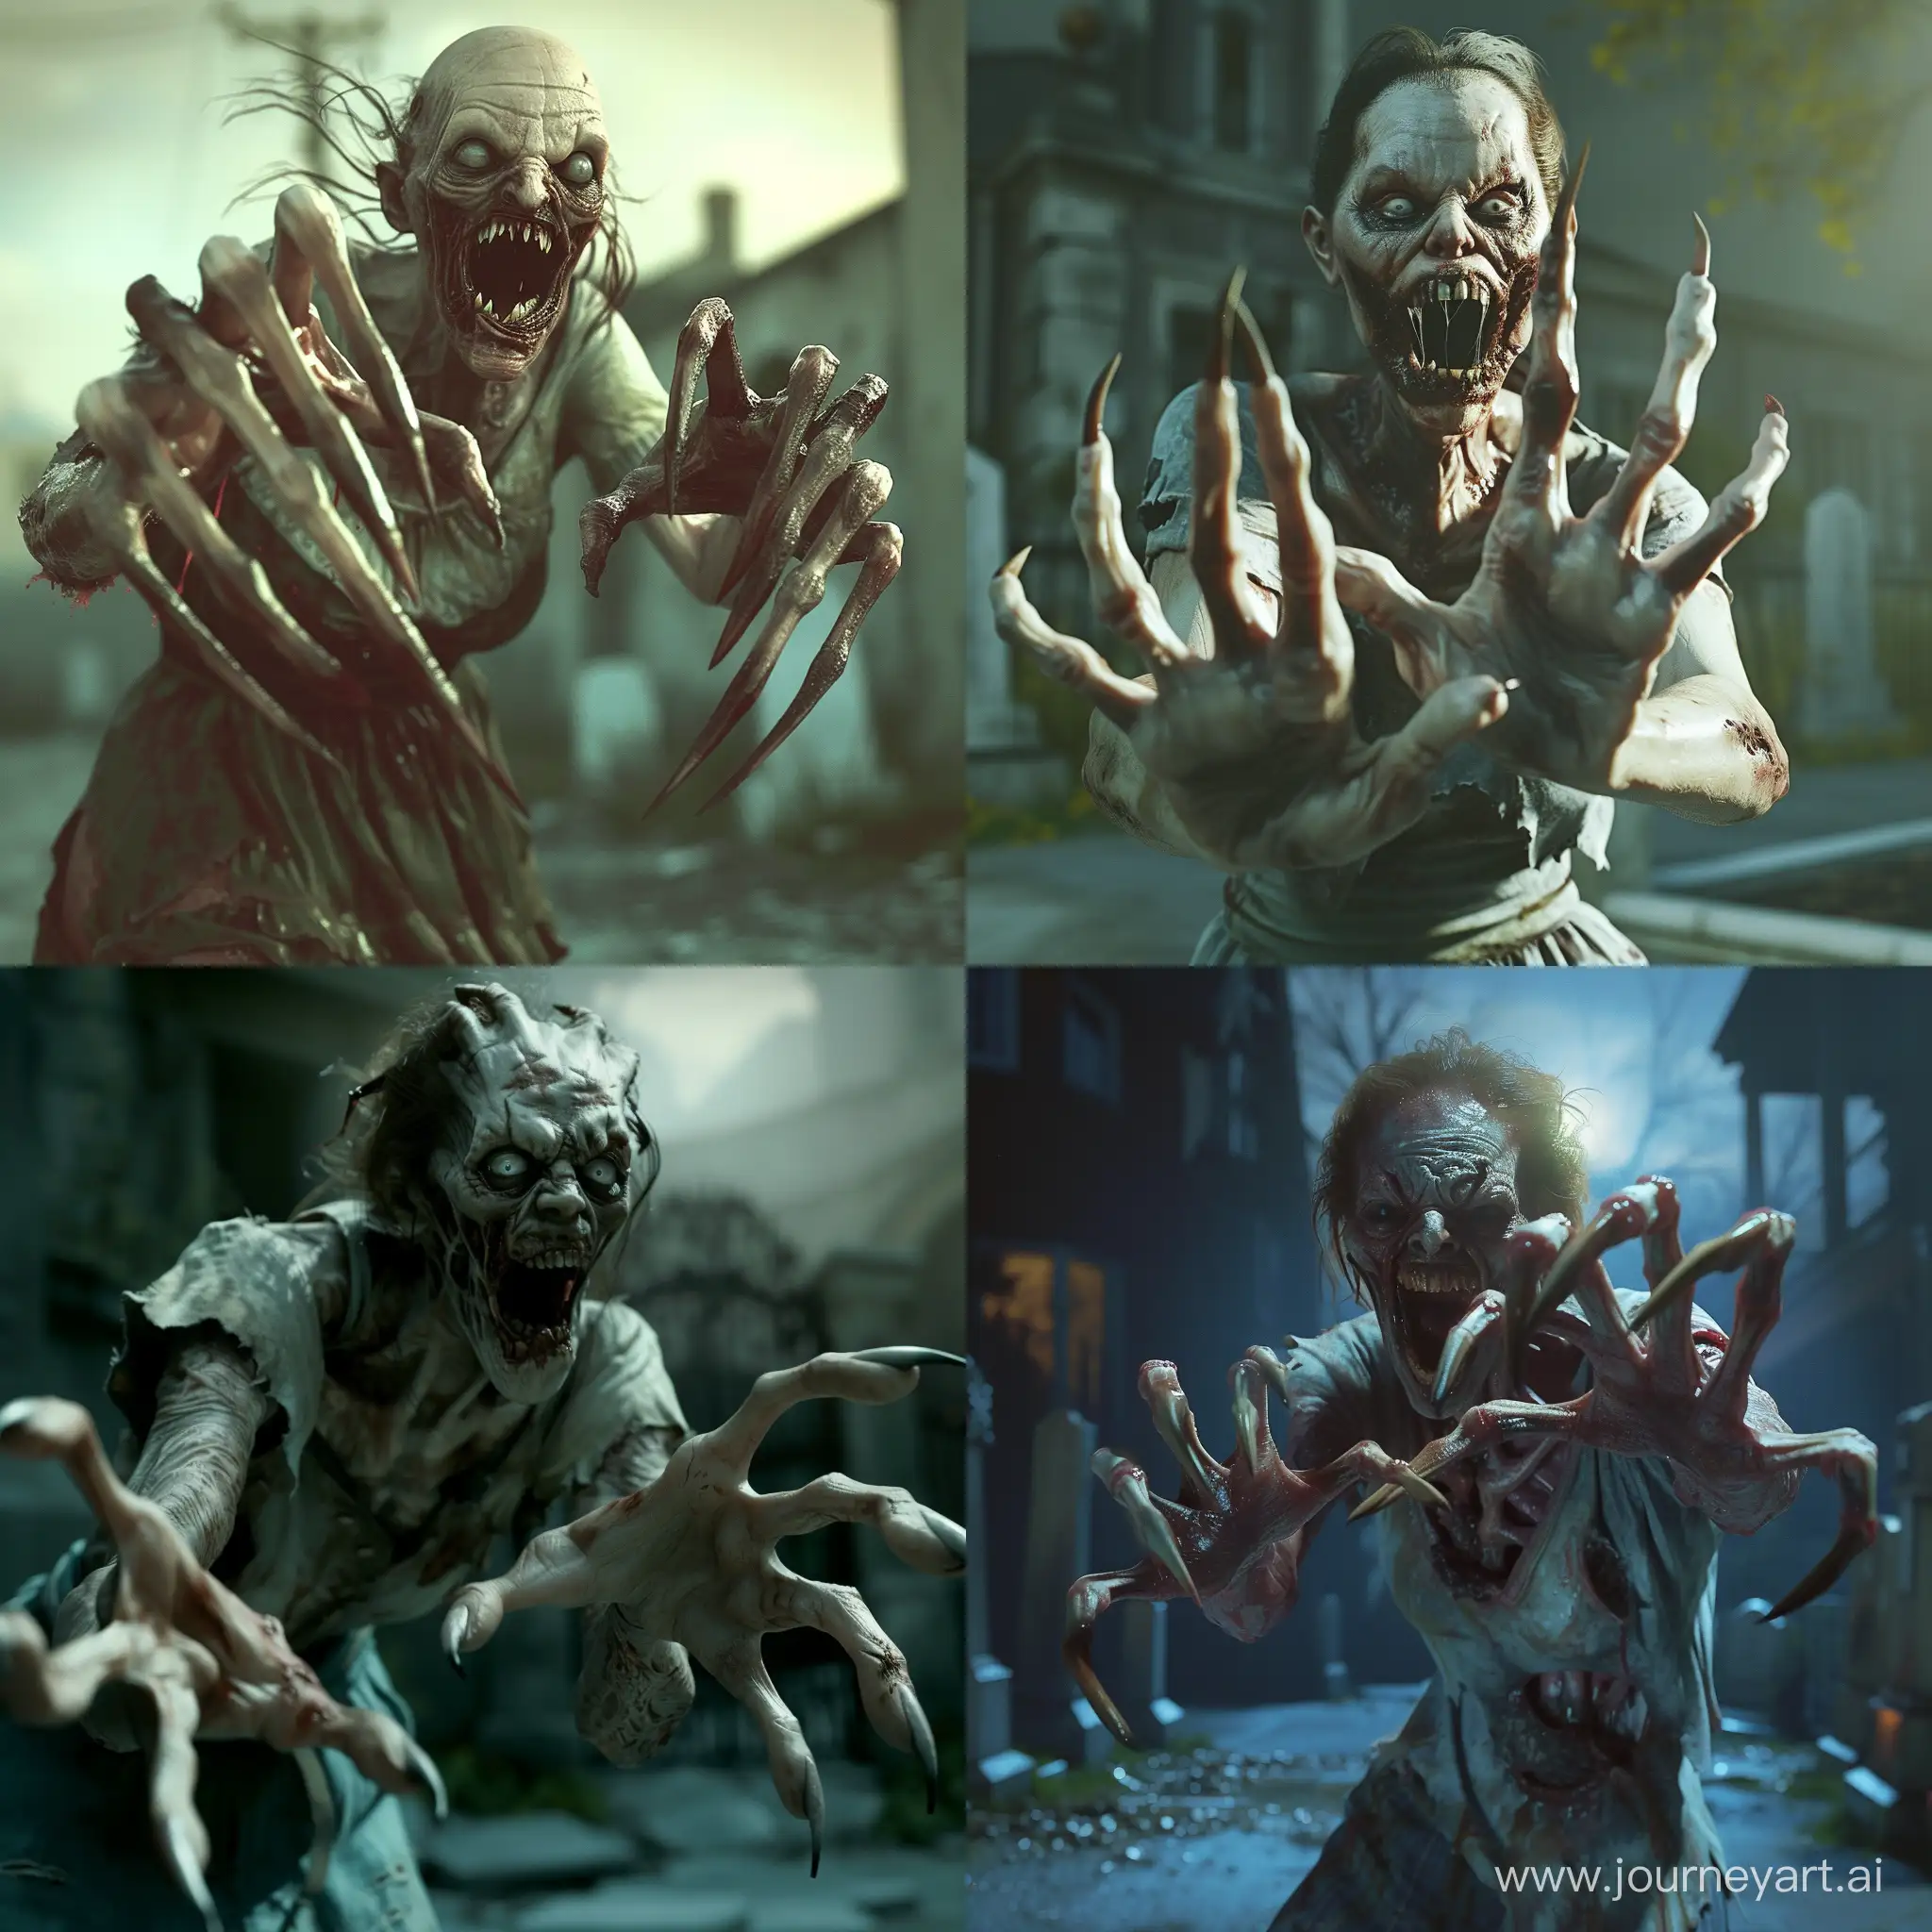 A rotting terrible zombie woman is standing in the middle of the scene, with curved, long, pointed nails protruding from her five fingers like menacing claws . Her mouth is dangerously open, exposing pointed teeth that resemble fangs. Her eyes are empty and she is dressed in torn clothing. She is holding her hands in front of her and is ready to attack. The scene takes place in an abandoned cemetery at night. It has a hyper-realistic feel, with high-definition cinematics and photorealistic lighting, as well as a focus on the detail of the hands and nails.